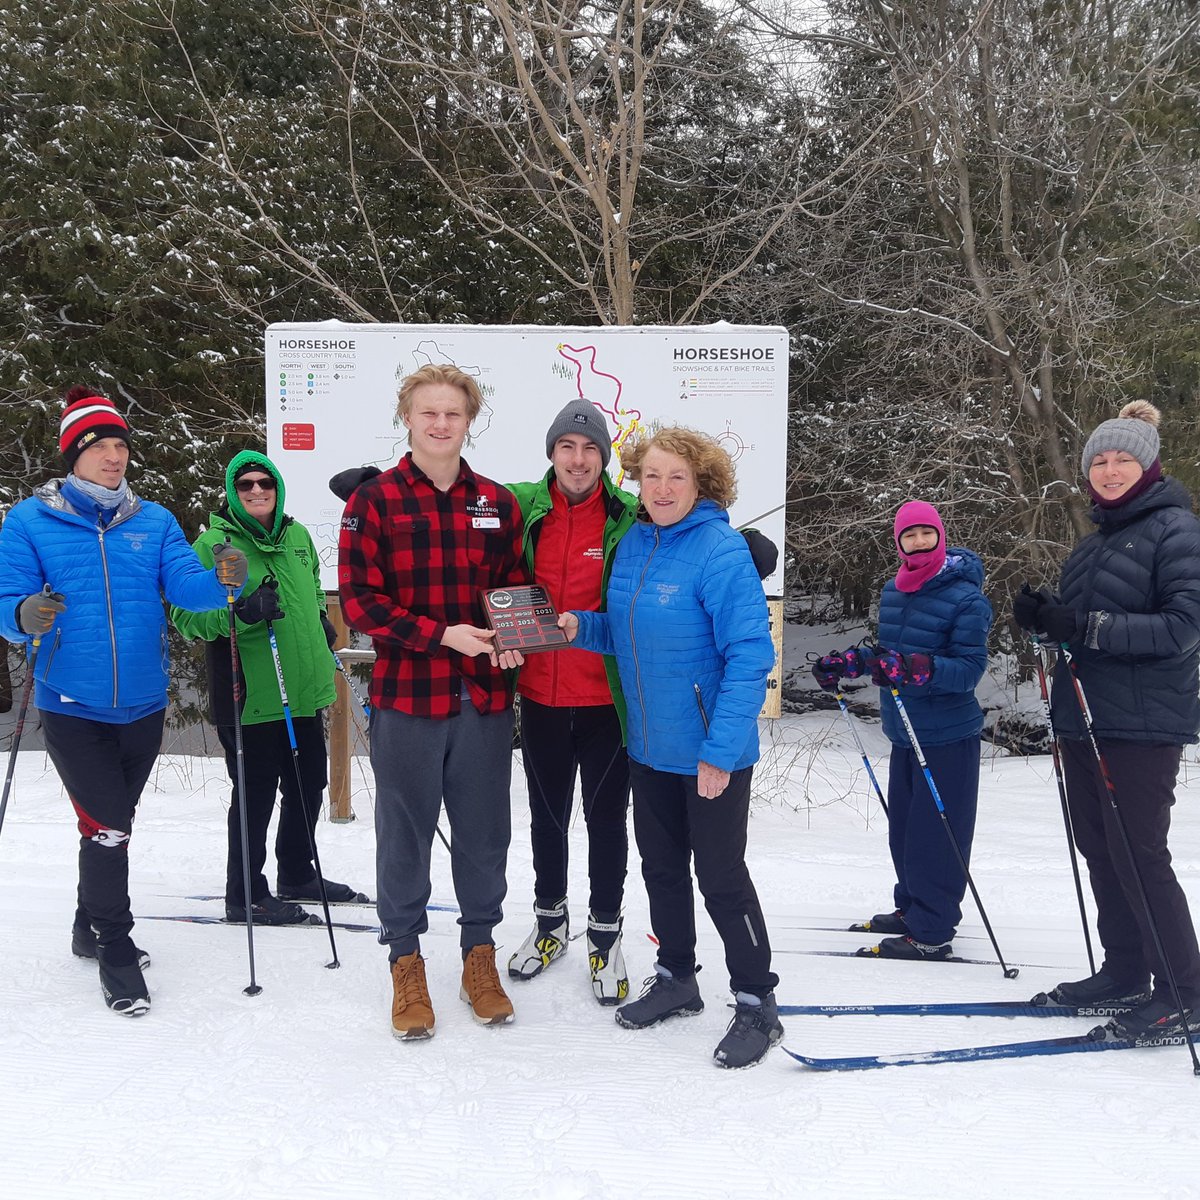 The #Barrie #SpecialOlympics #nordicskiing team remains super appreciative of the continued support of @HorseshoeResort. Thank you for keeping our athletes fit and having fun on the trails! ❄